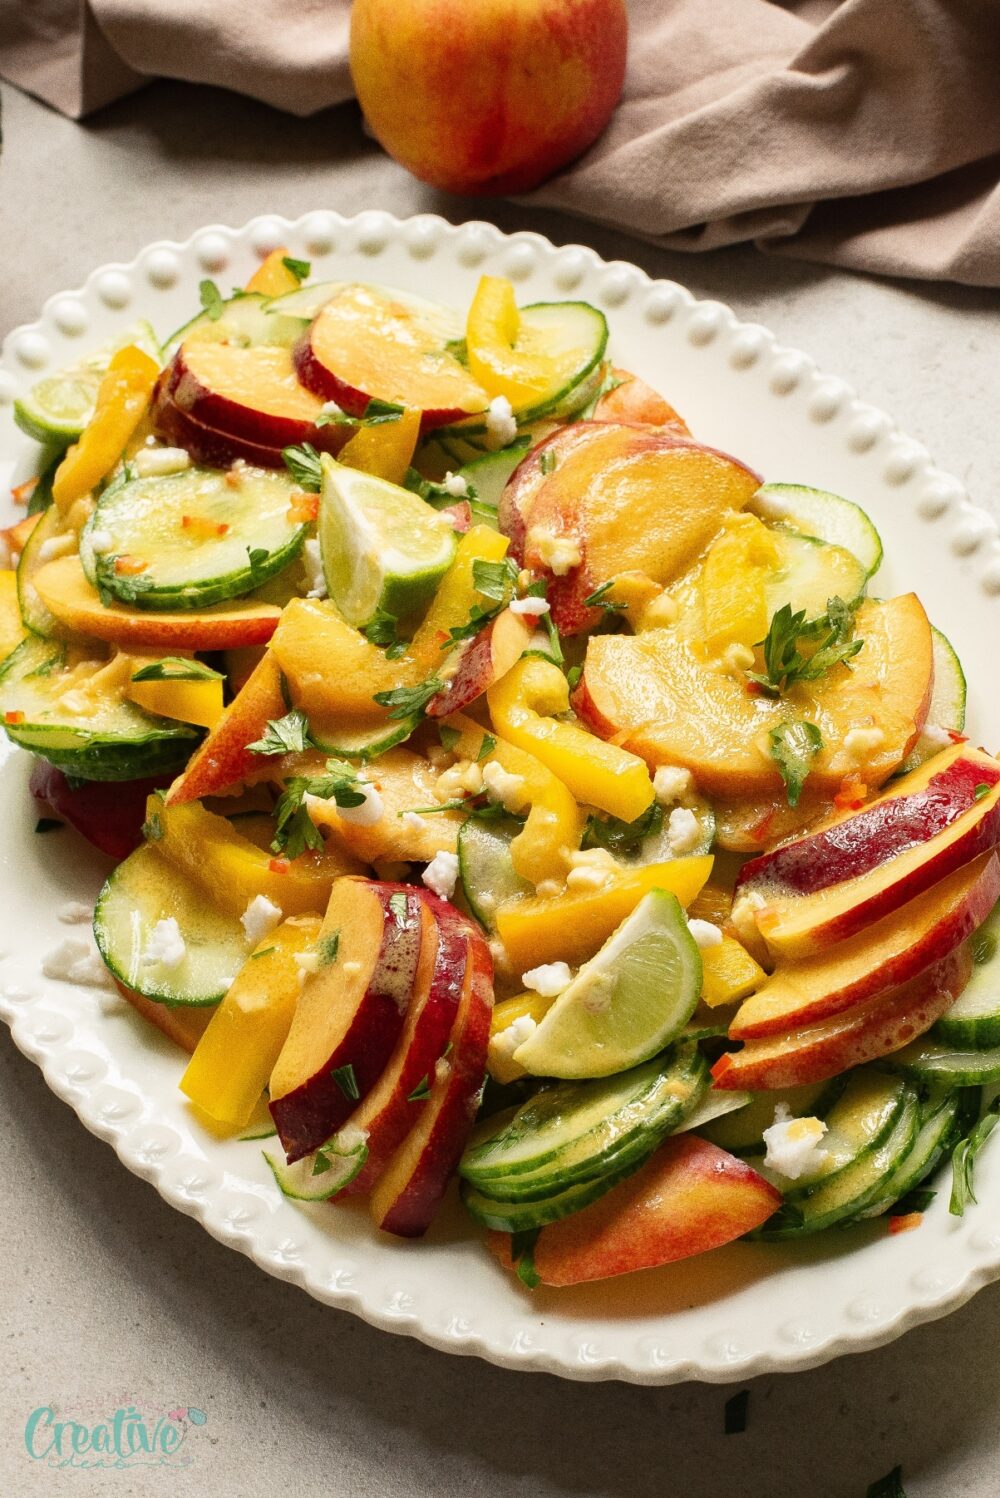 Sliced nectarines and cucumbers accompanied by a delicious dressing, a simple and flavorful nectarine salad.